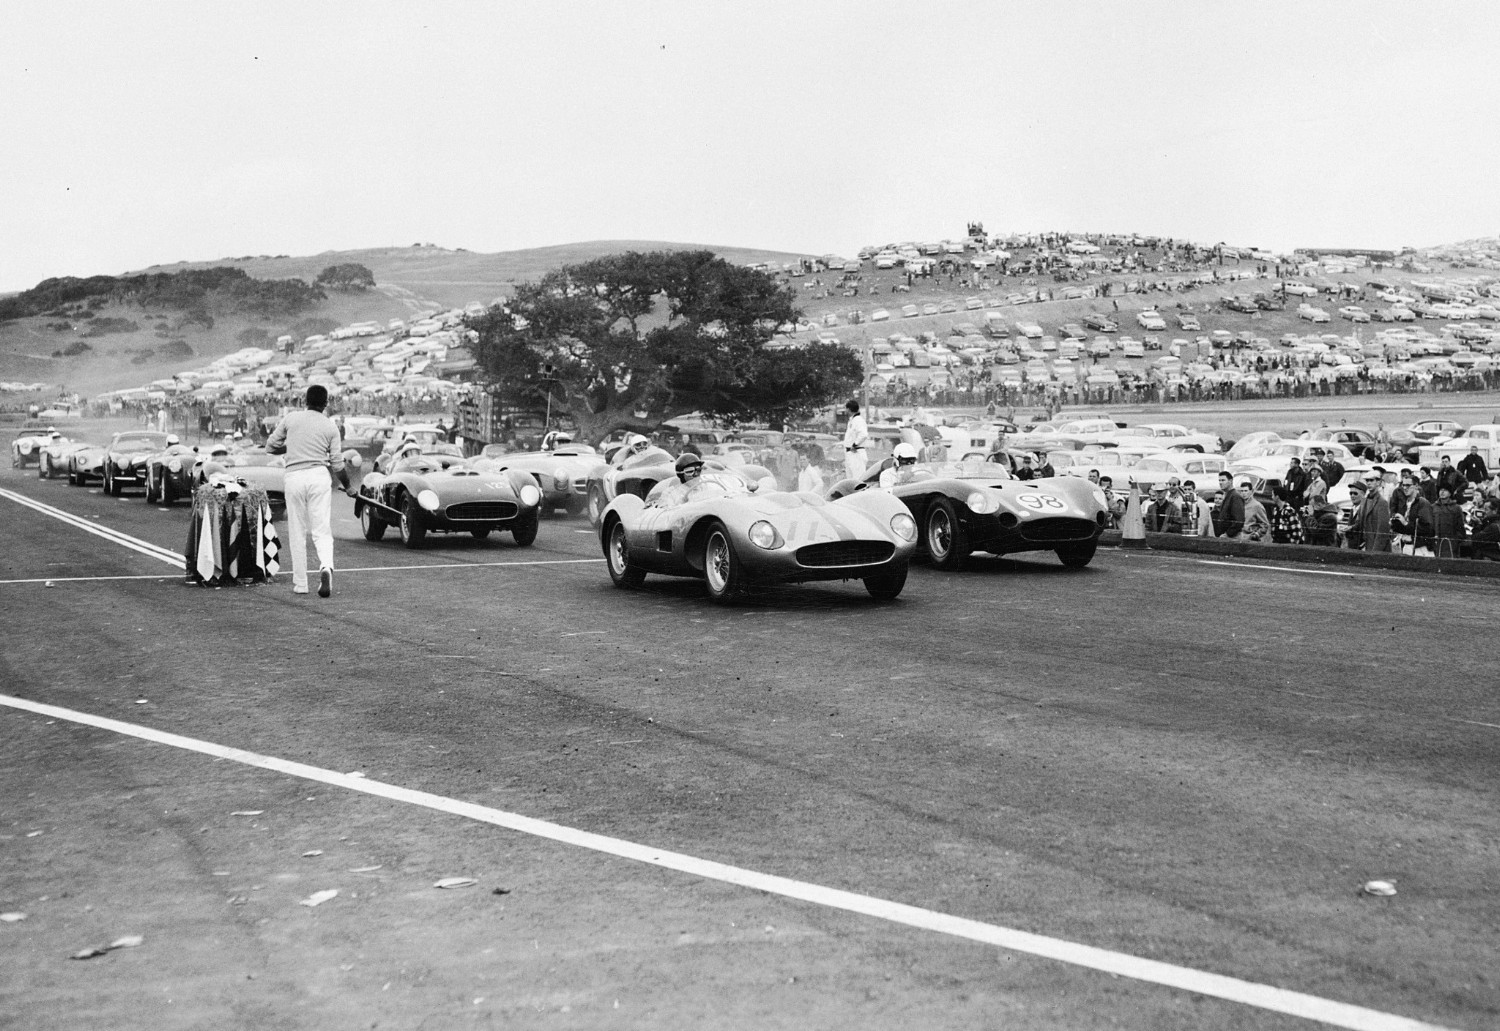 John Von Neumann in the (11) Ferrari TR takes pole against Carroll Shelby (98) in a Maserati 450S, while eventual race winner Pete Lovely (125) in a 2-litre Ferrari TR sits in third for the start of the inaugural race November 1957. Note how close spectators are to the race track.